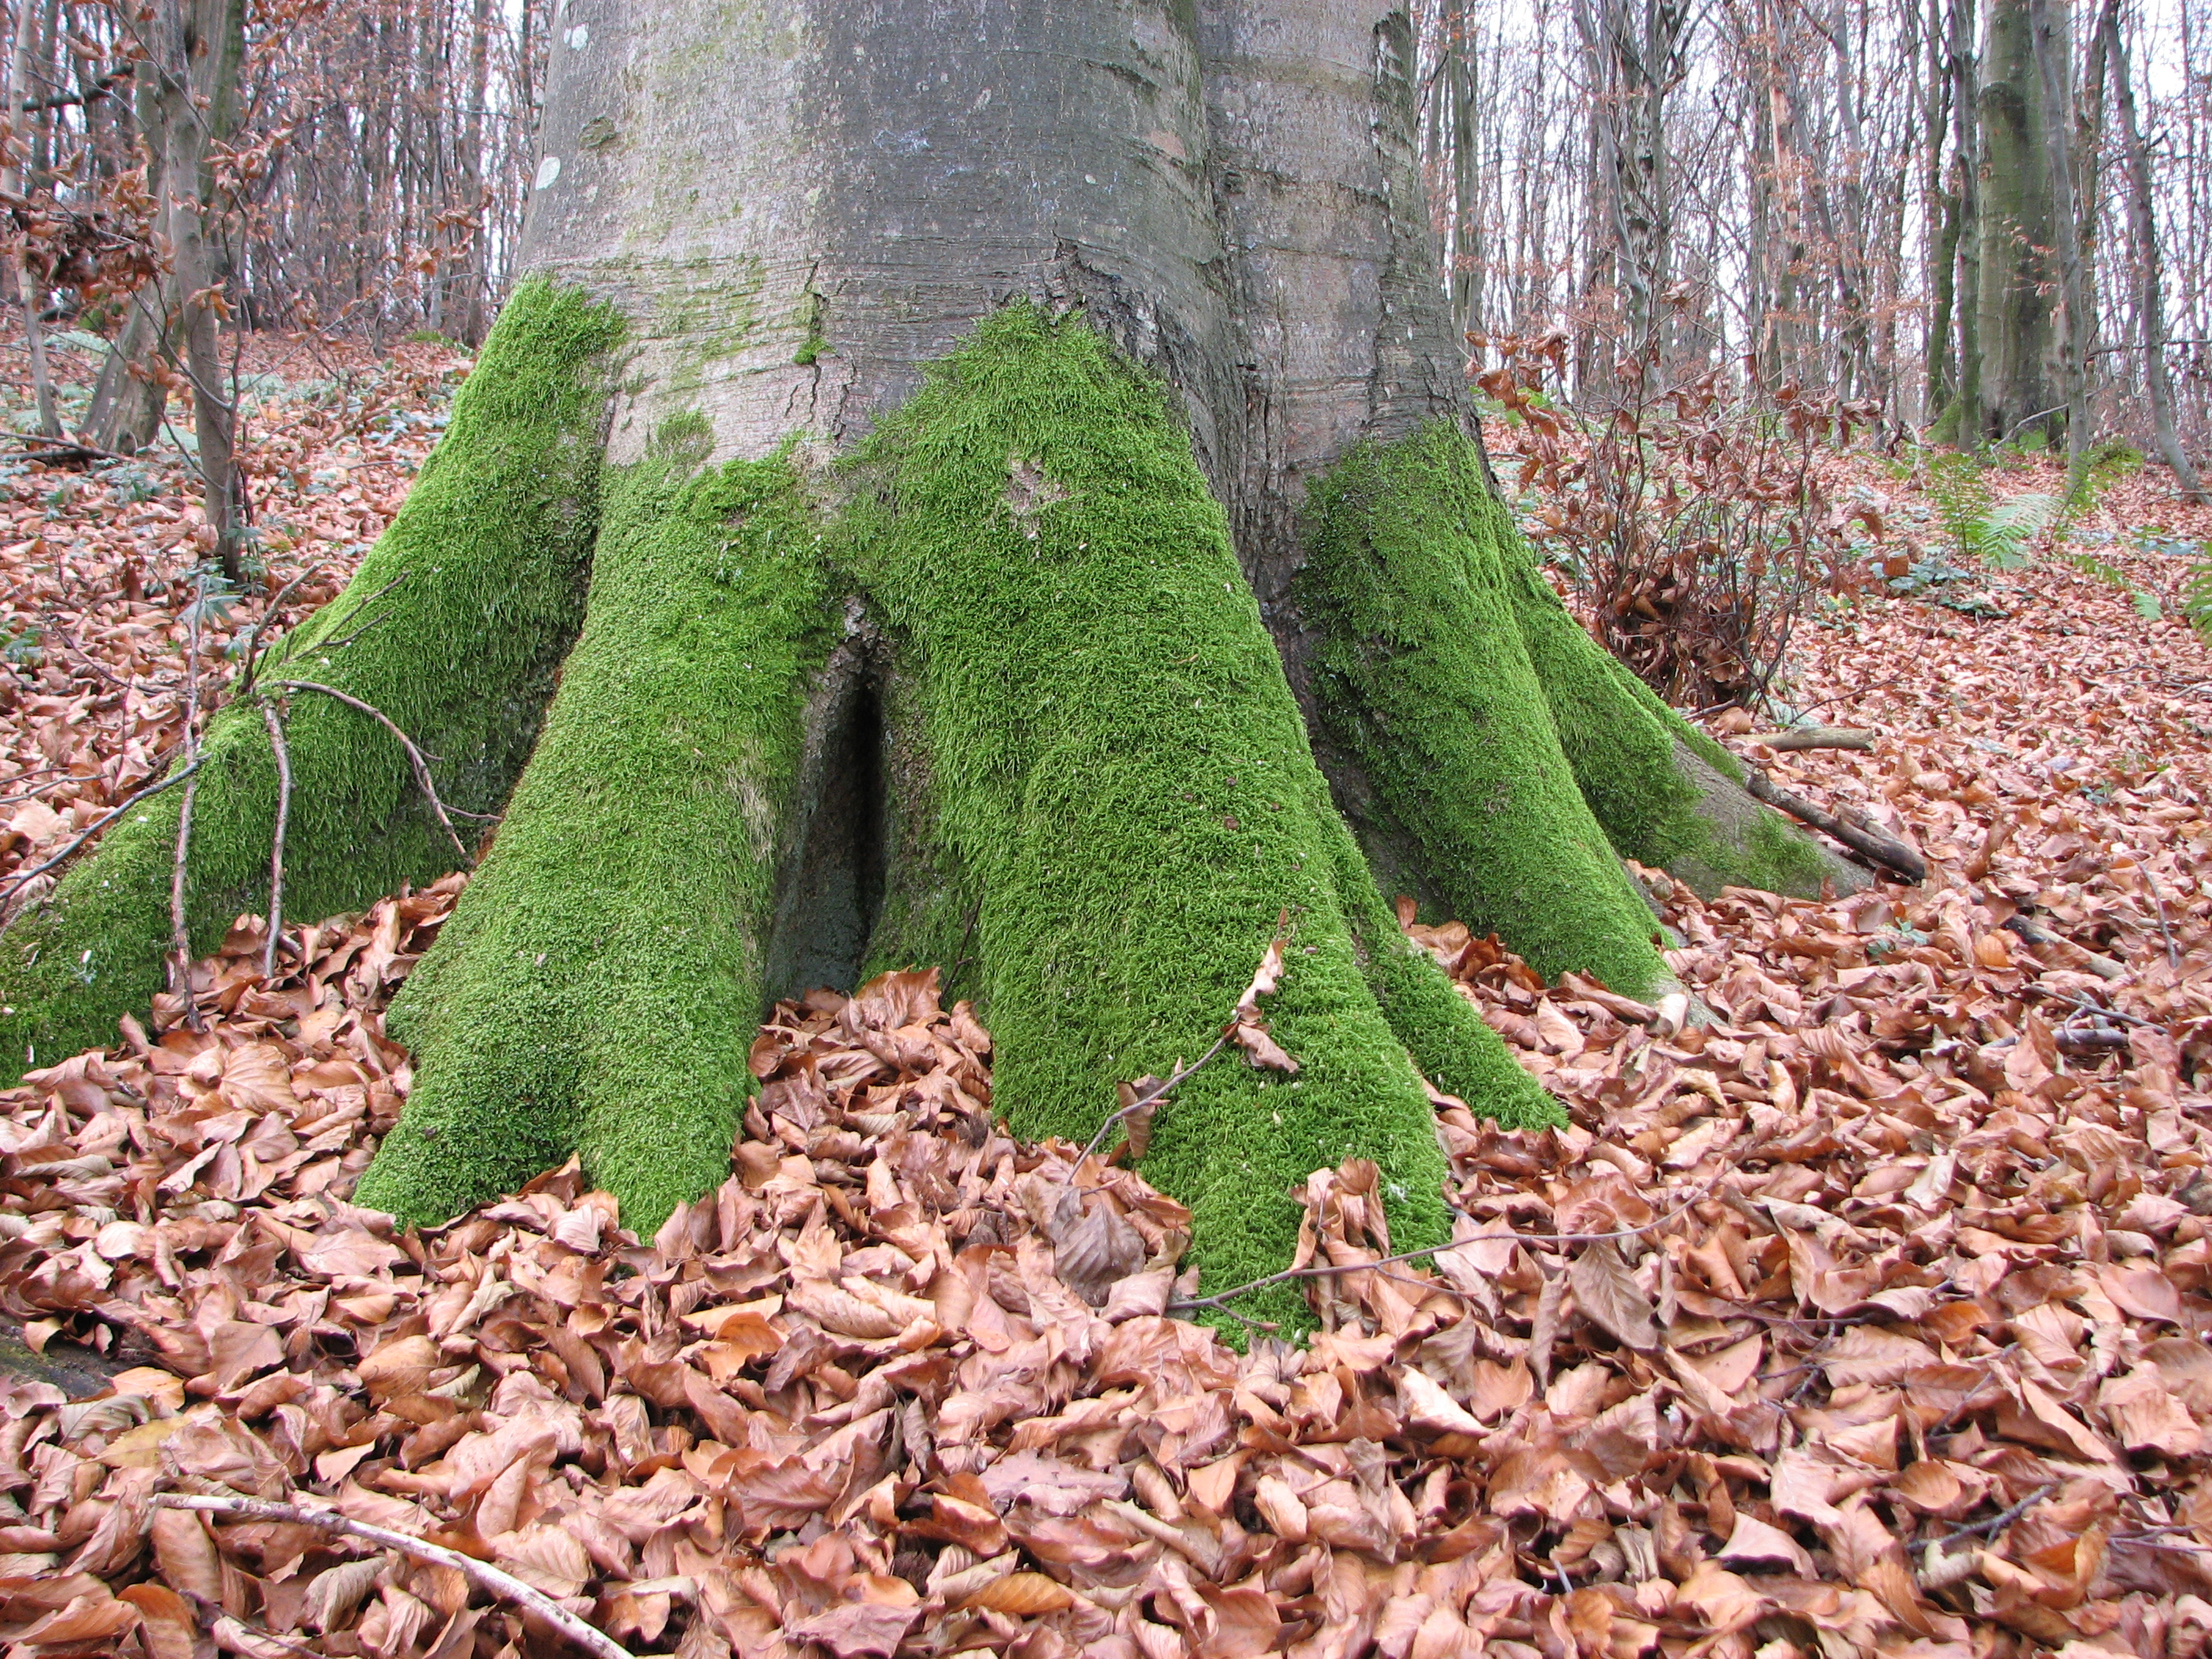 Tree roots with moss growing on them, picture 4